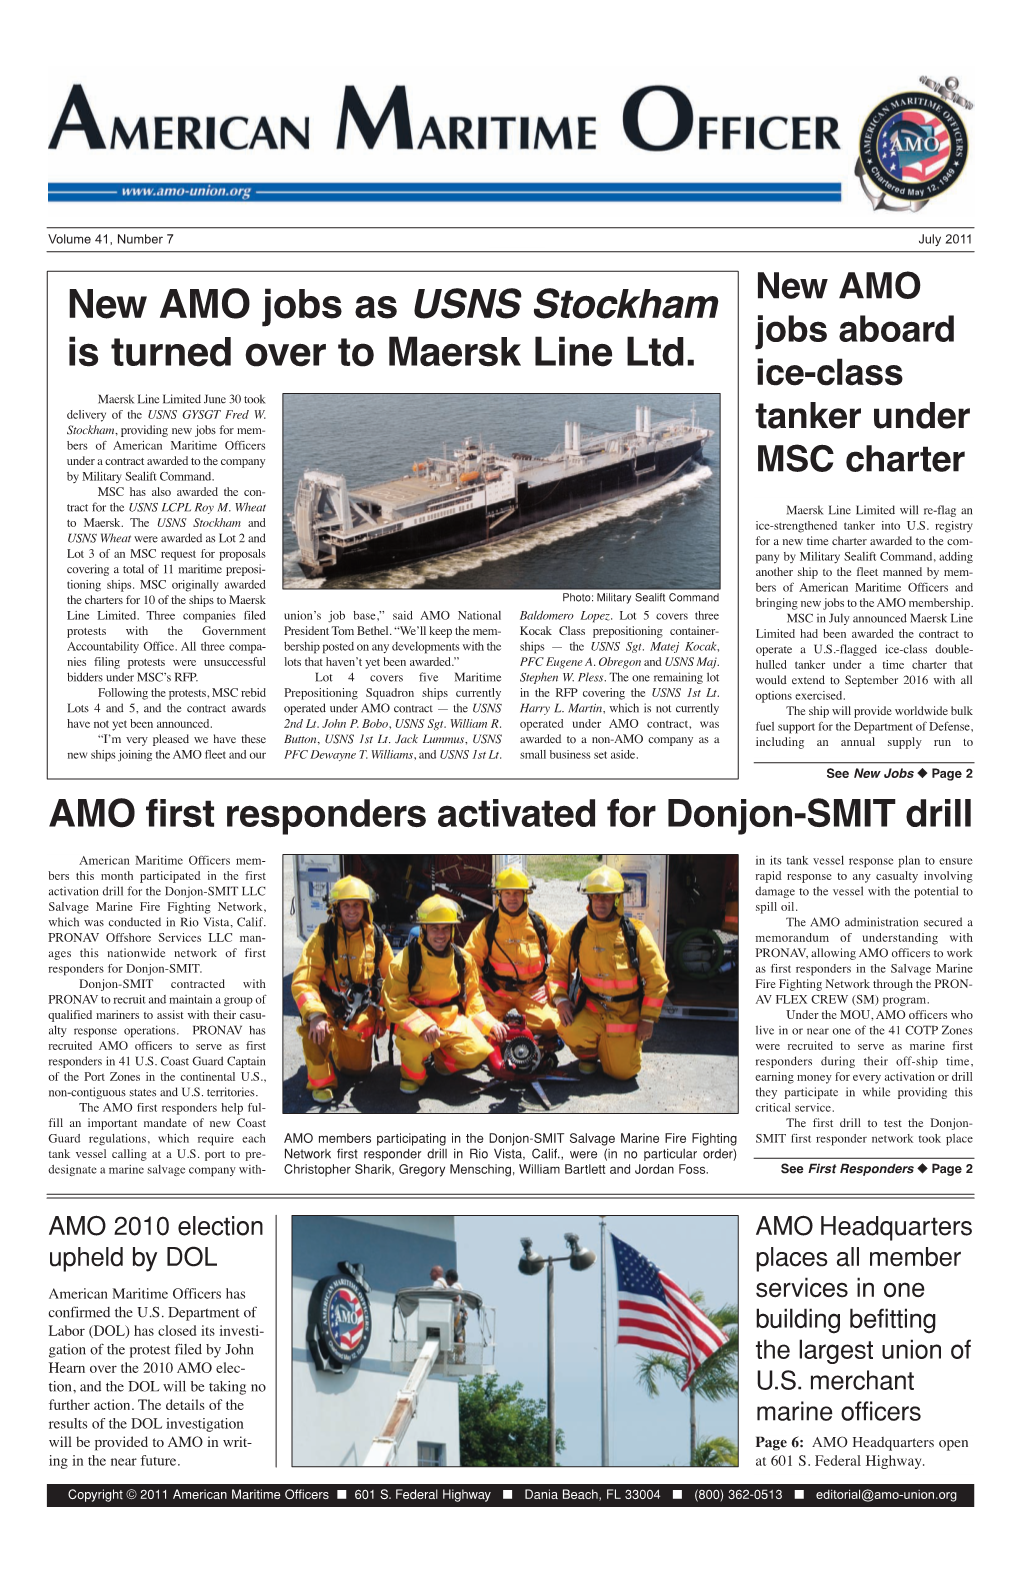 New AMO Jobs As USNS Stockham Is Turned Over to Maersk Line Ltd